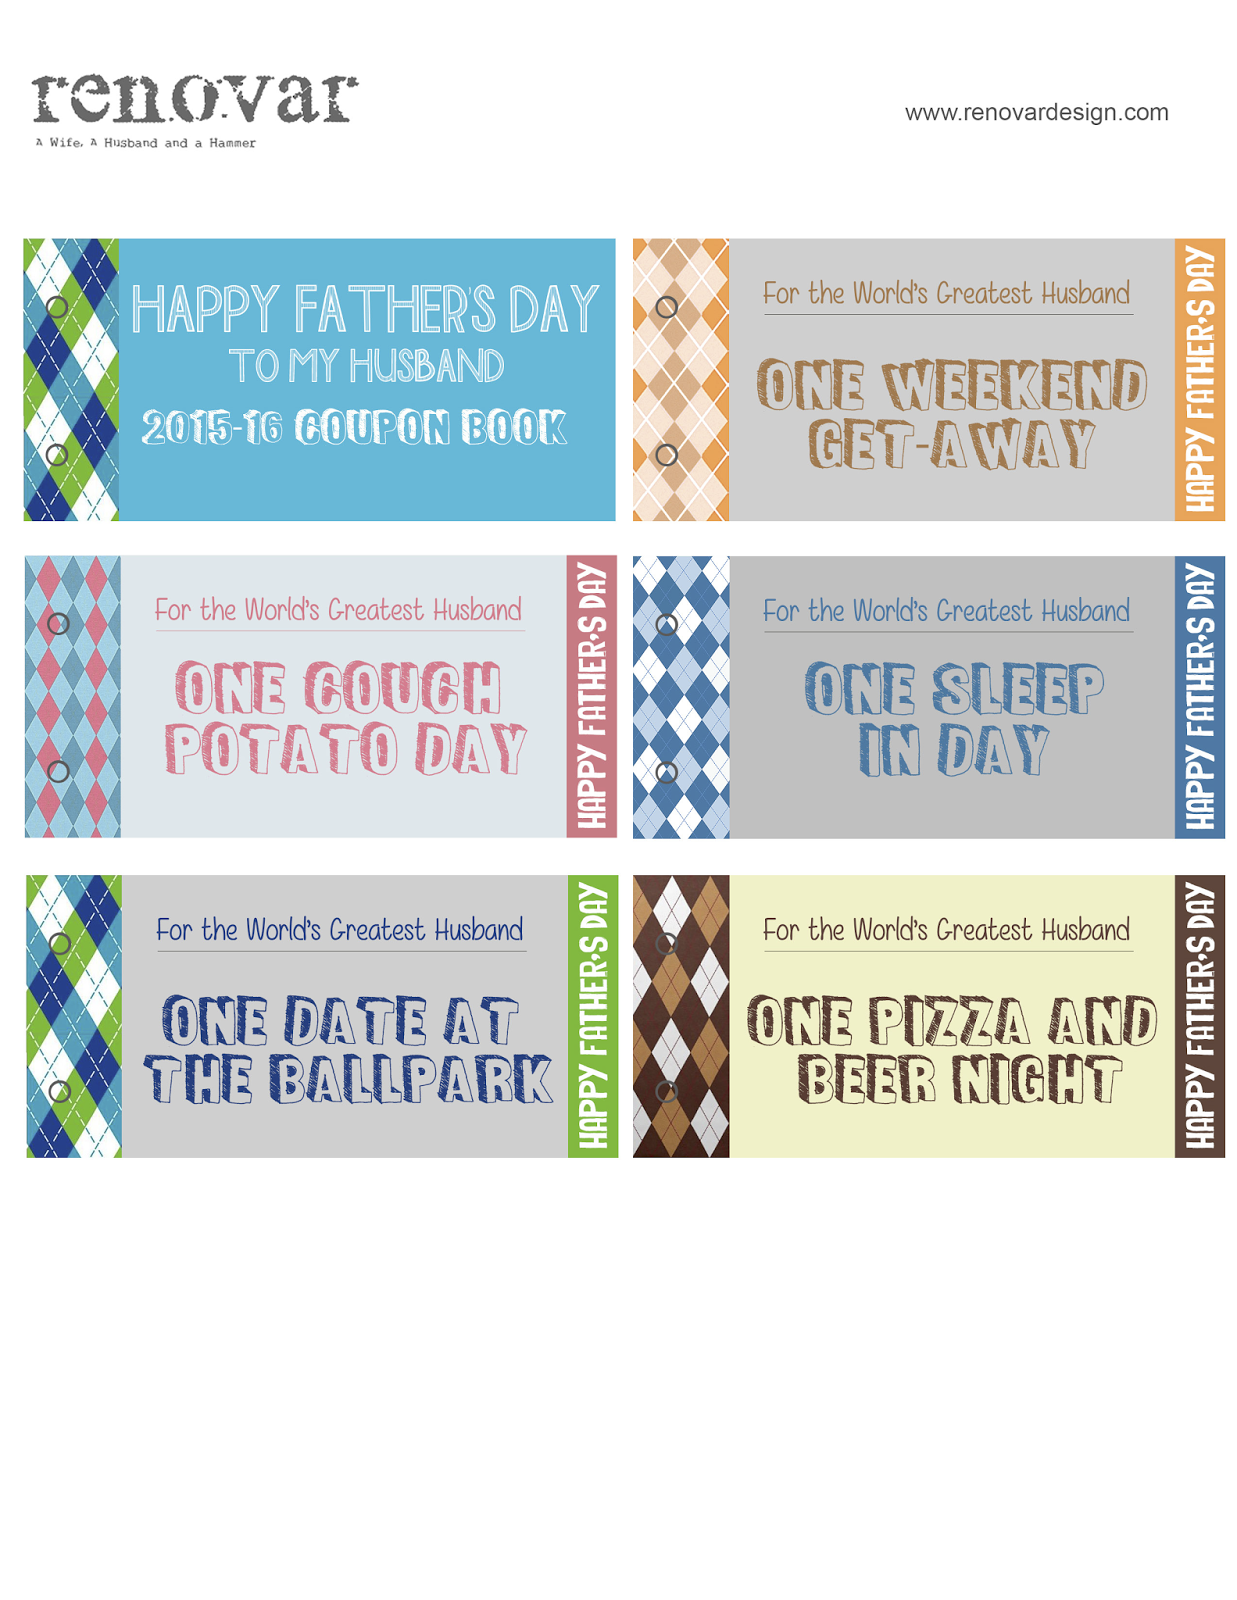 from-gardners-2-bergers-renovar-father-s-day-printable-coupon-book